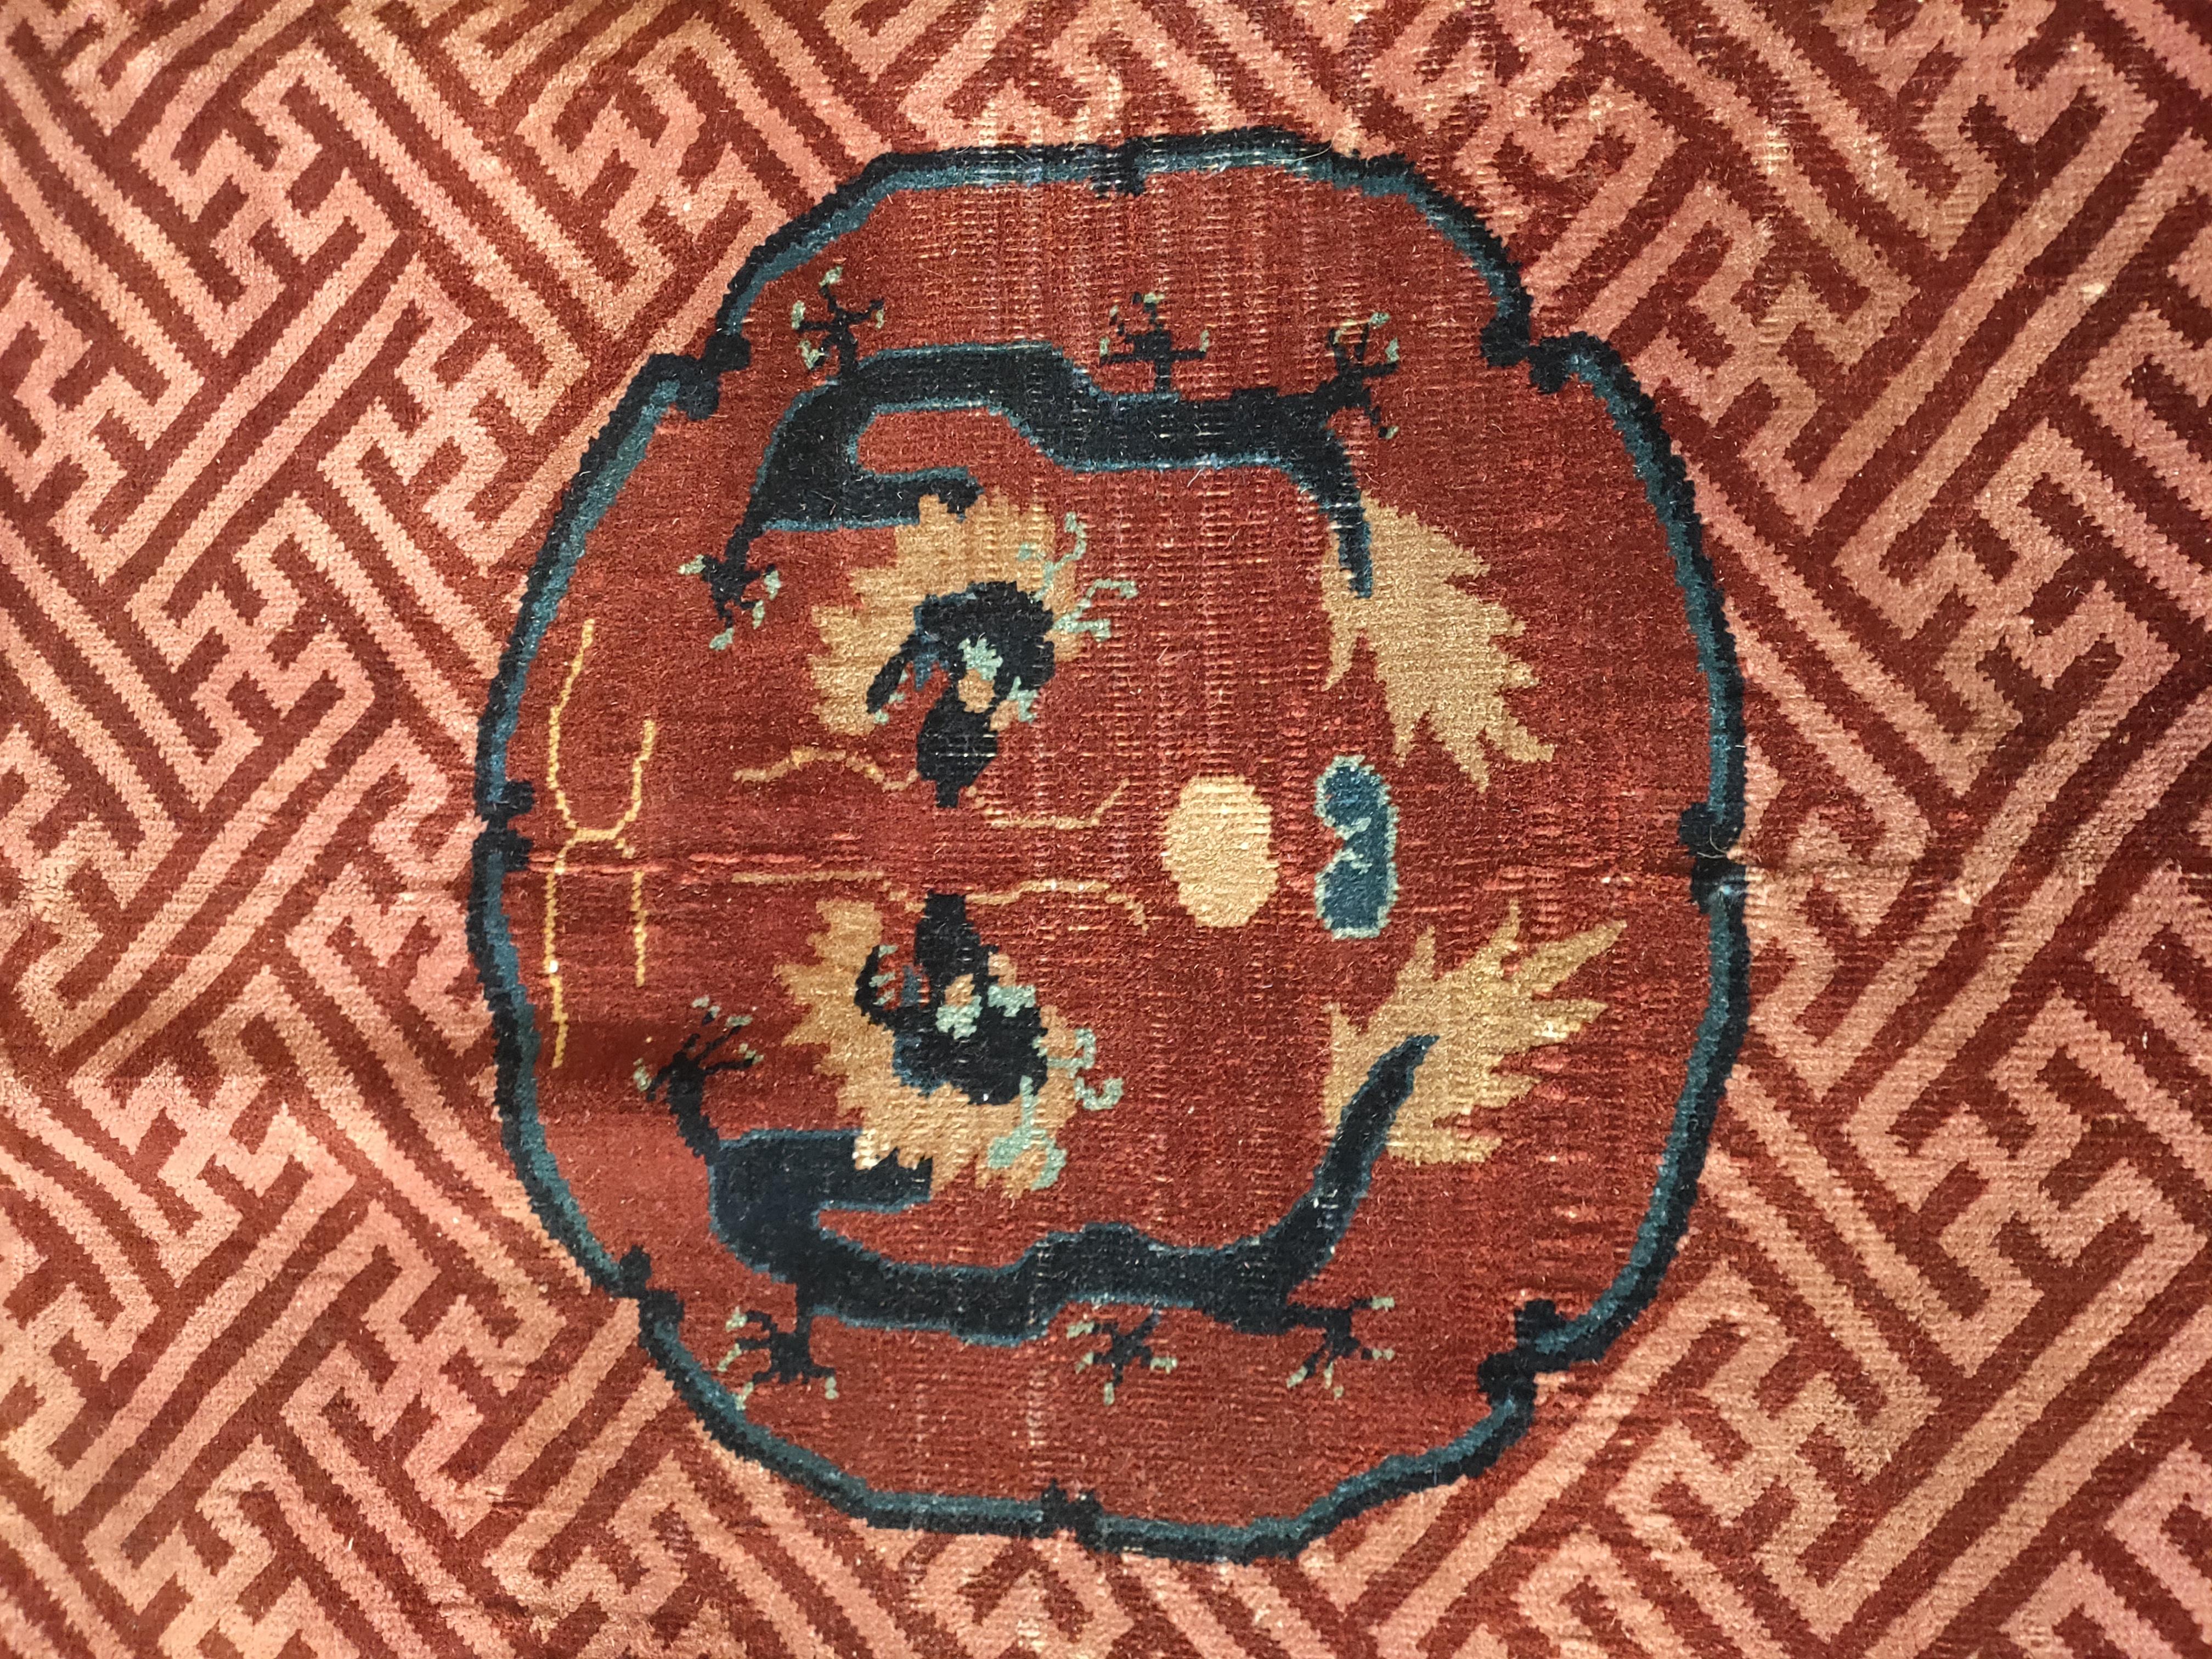 Hand-Knotted Early 20th Century Chinese Peking Carpet ( 8' x 9'6